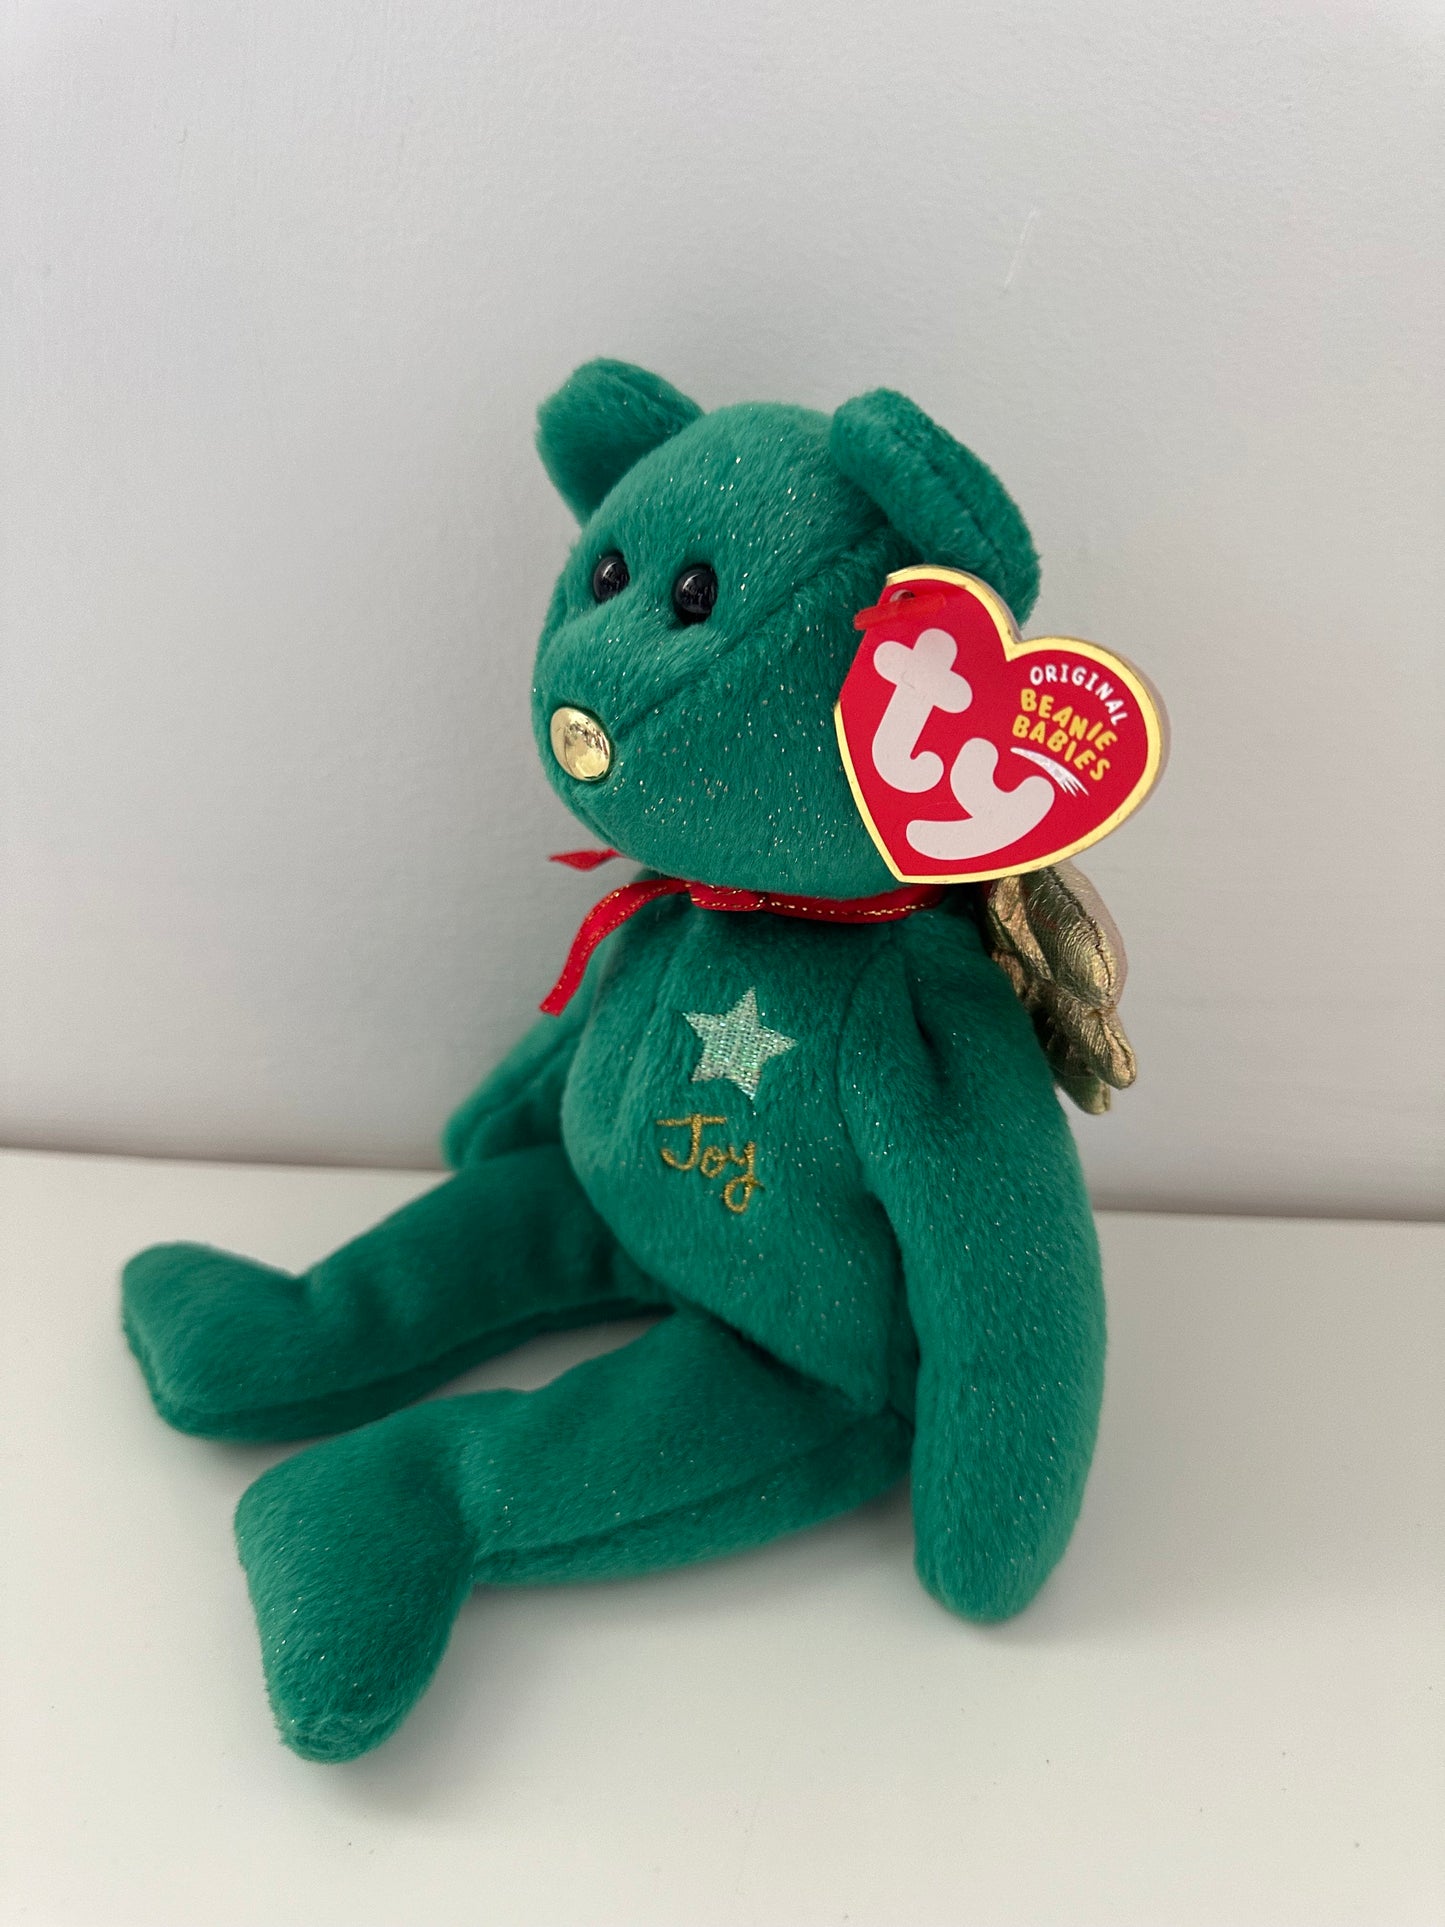 Ty Beanie Baby “Gift” the Angel Bear with Wings - Green Version Joy - Hallmark Gold Crown Exclusive (8.5 inch)